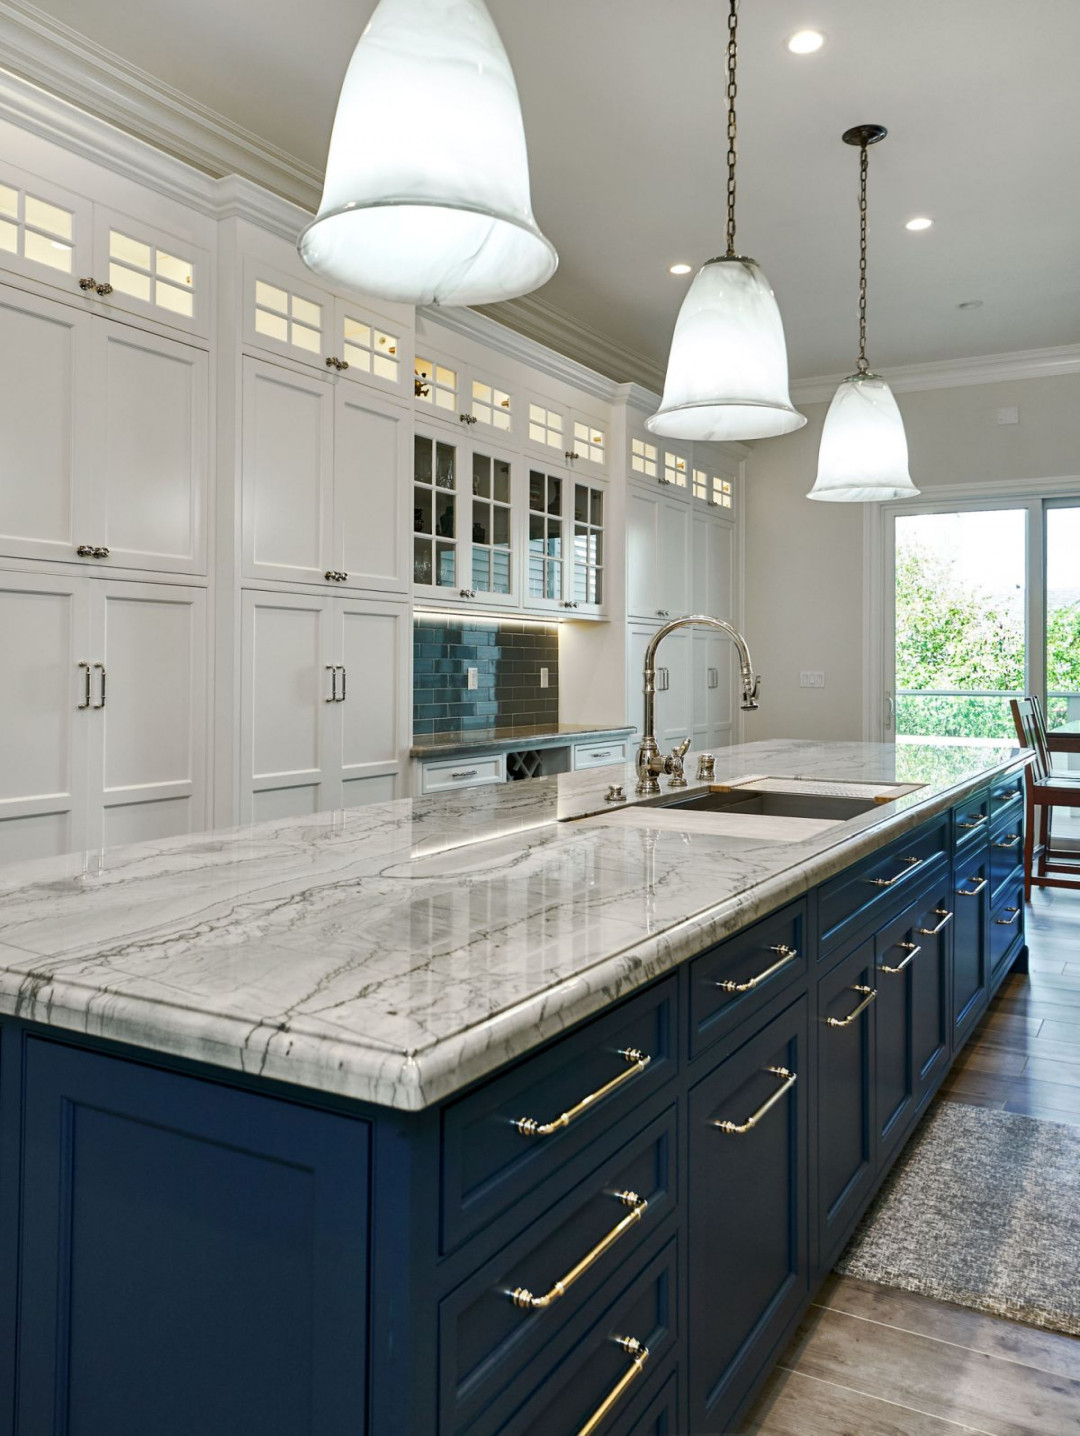 Quartzite Countertops: Are They a Good Fit for your Kitchen?